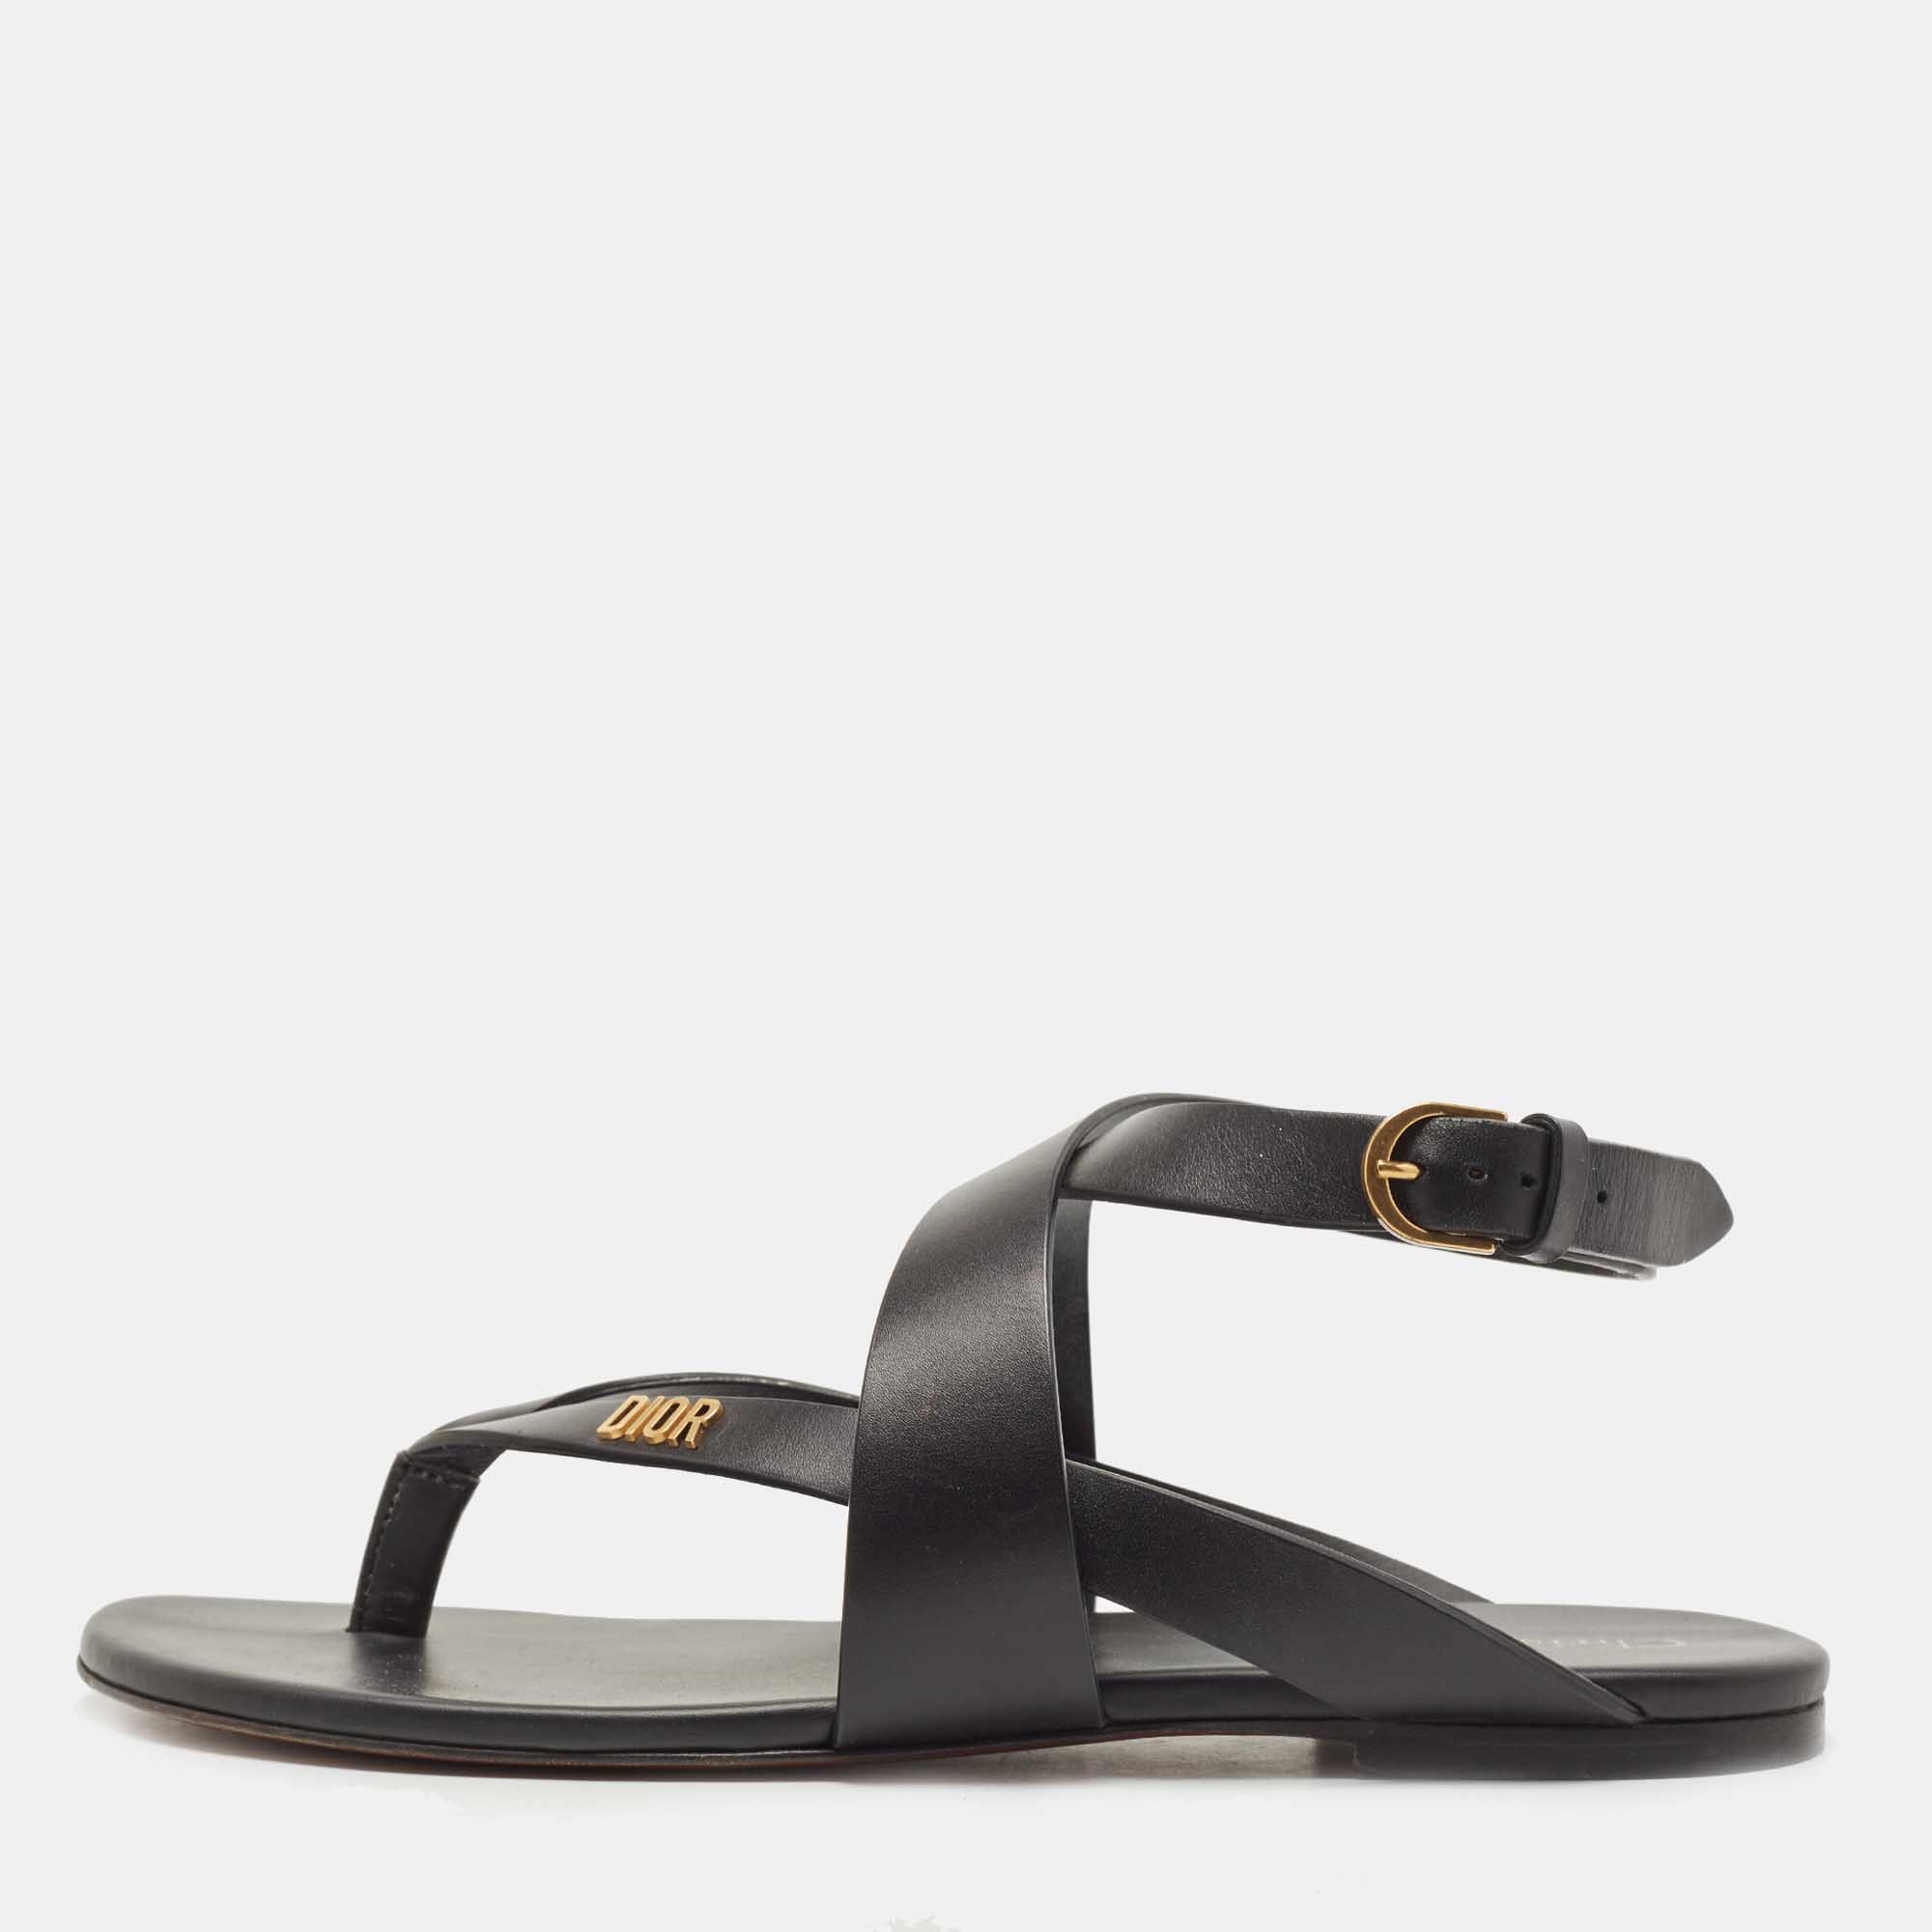 Dior Black Leather Flat Thong Sandals Size 39